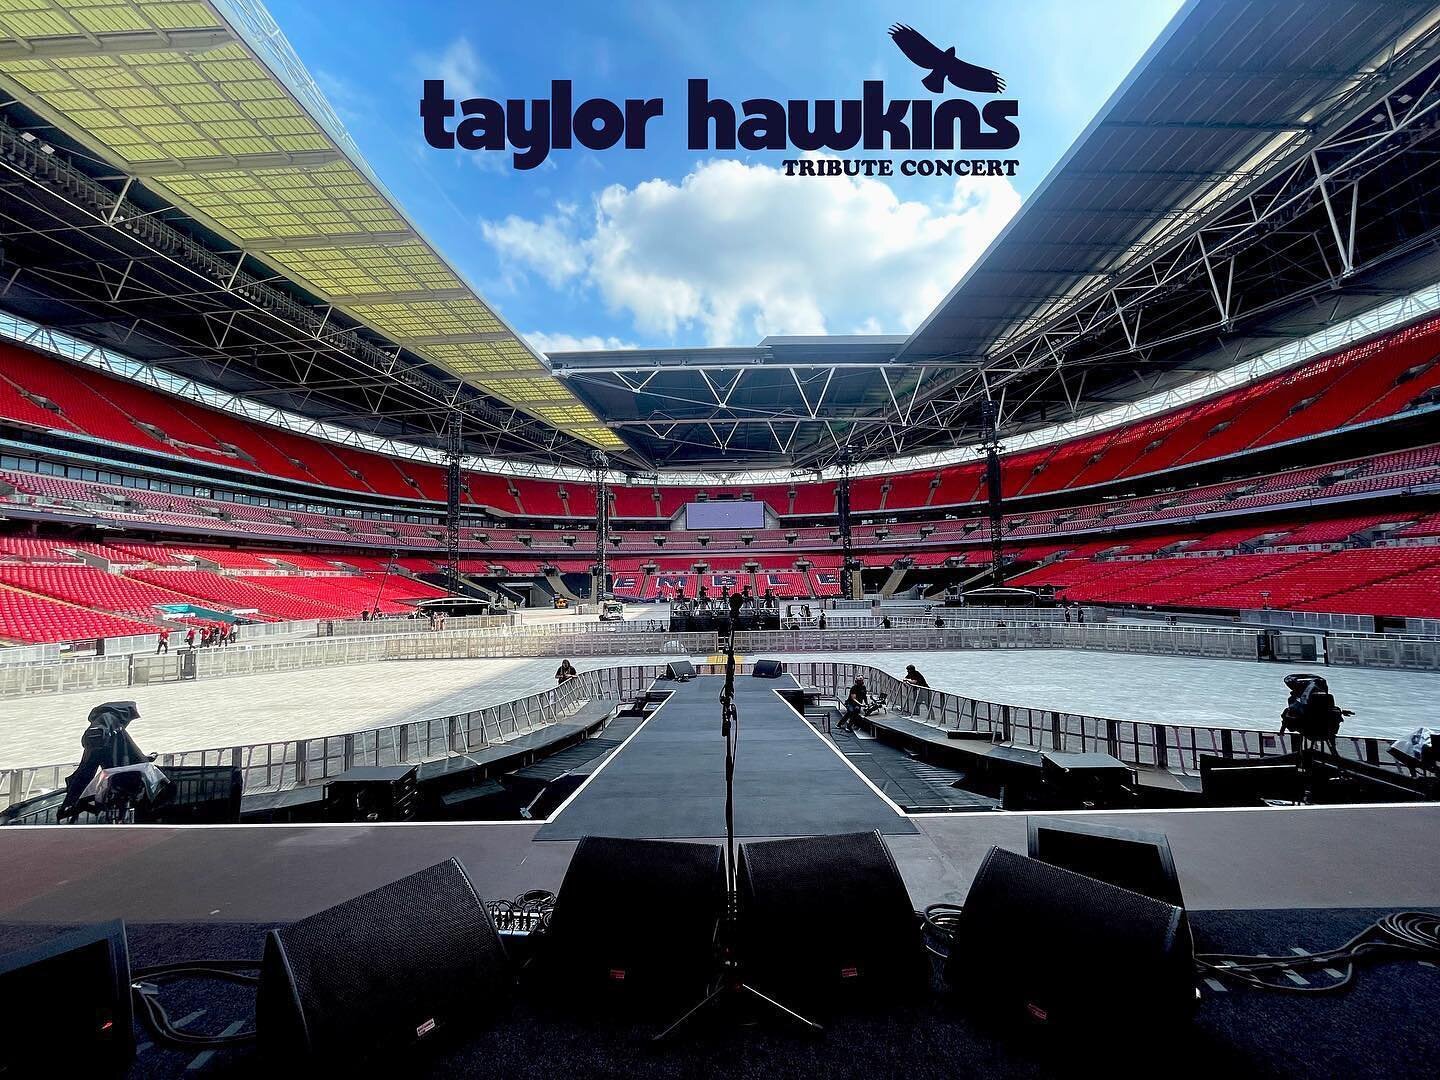 @foofighters TODAY #TaylorHawkinsTribute
Show begins at 4:30pm BST - You won&rsquo;t want to miss the start! Watch live anywhere in the world at the @MTV YouTube link in bio.